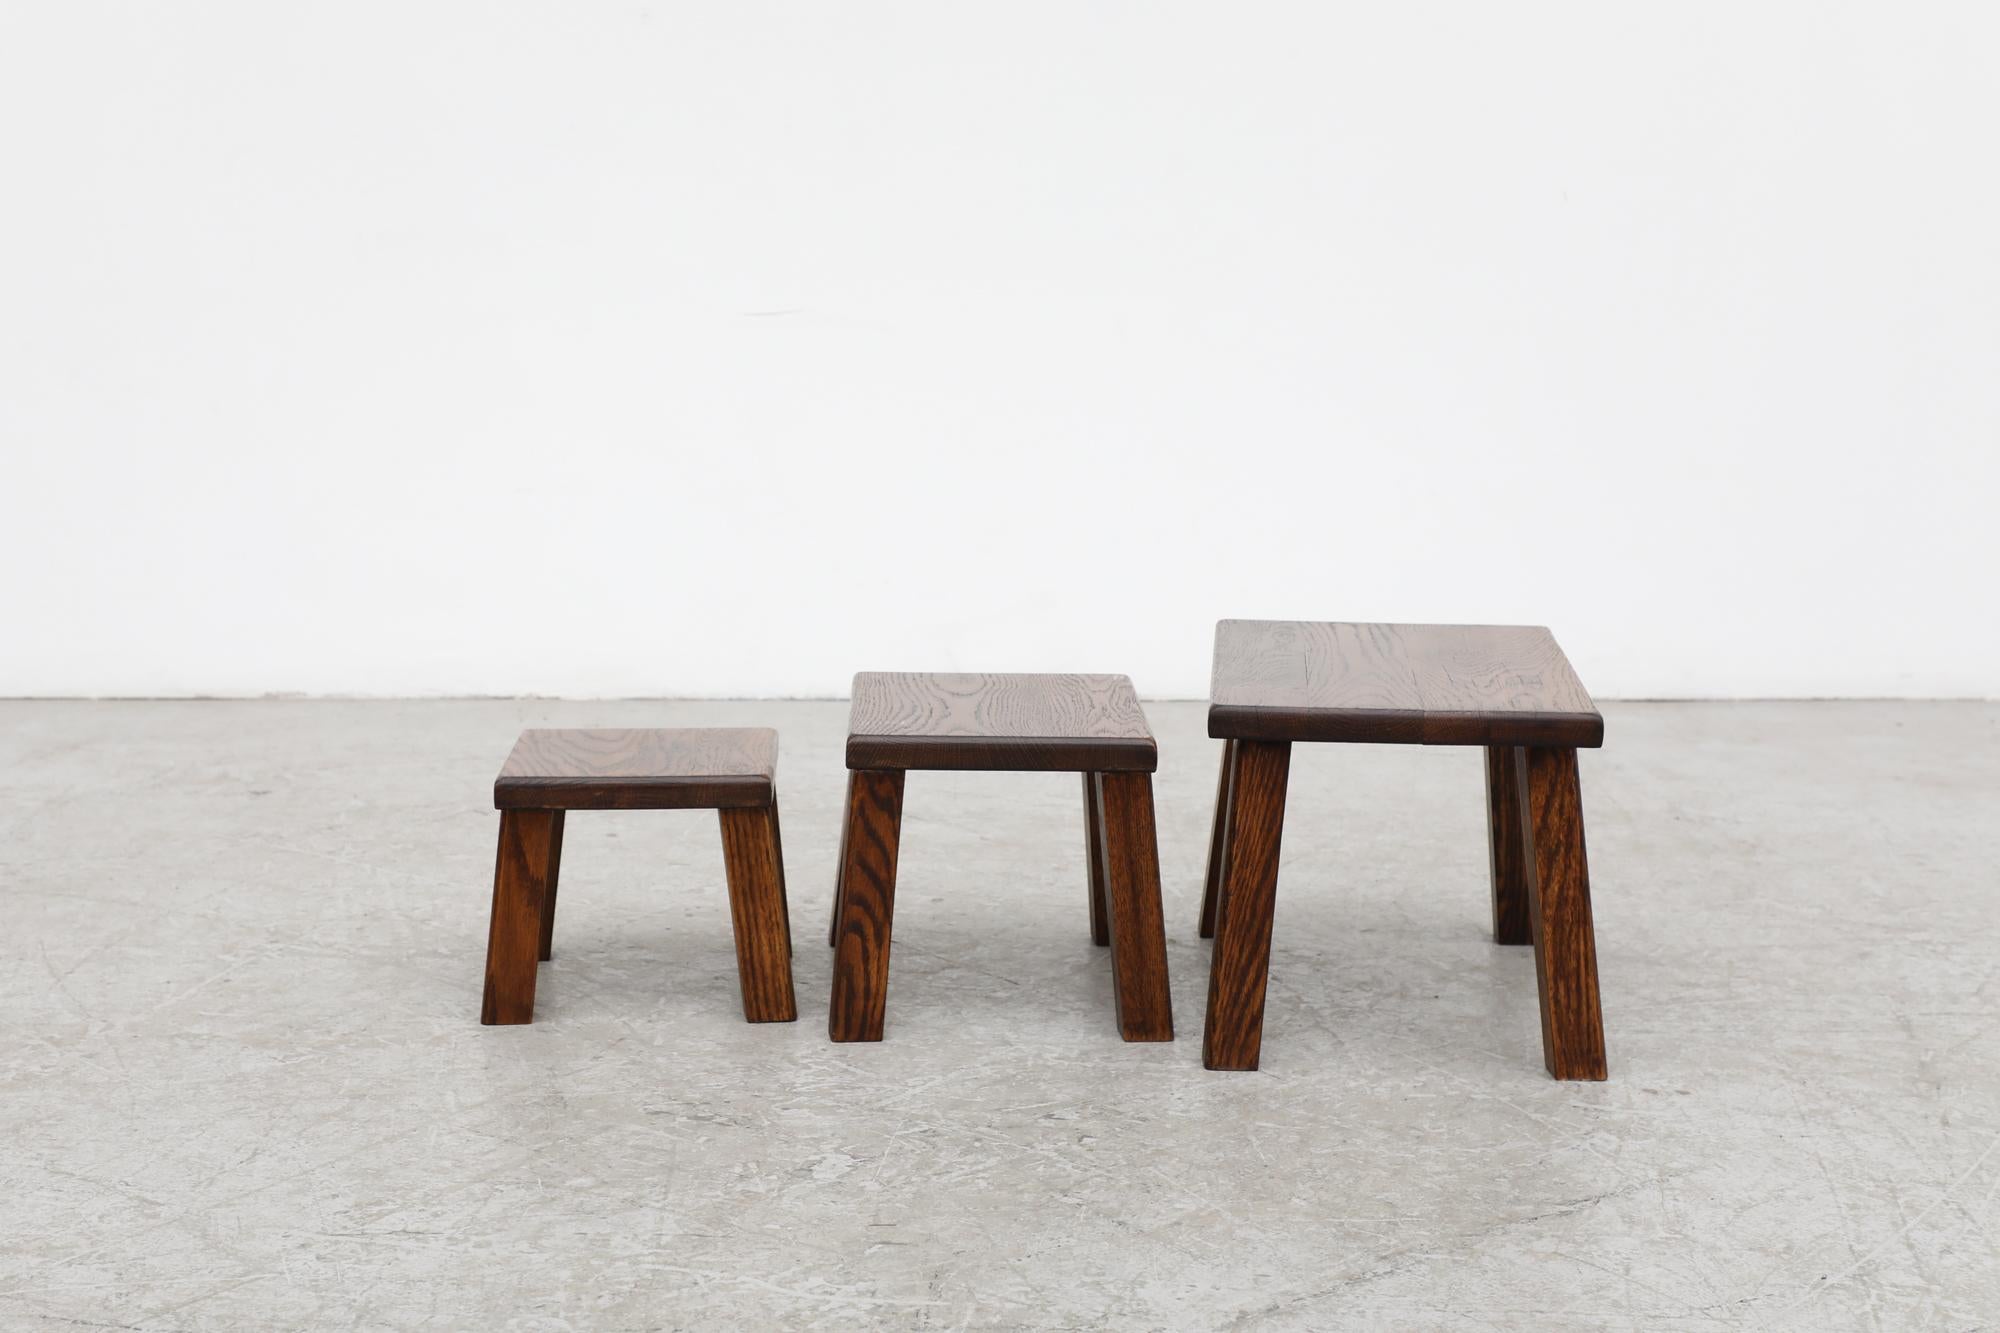 Pierre Chapo Inspired Dark Oak Brutalist Nesting Tables w/ Thick Angled Legs For Sale 2